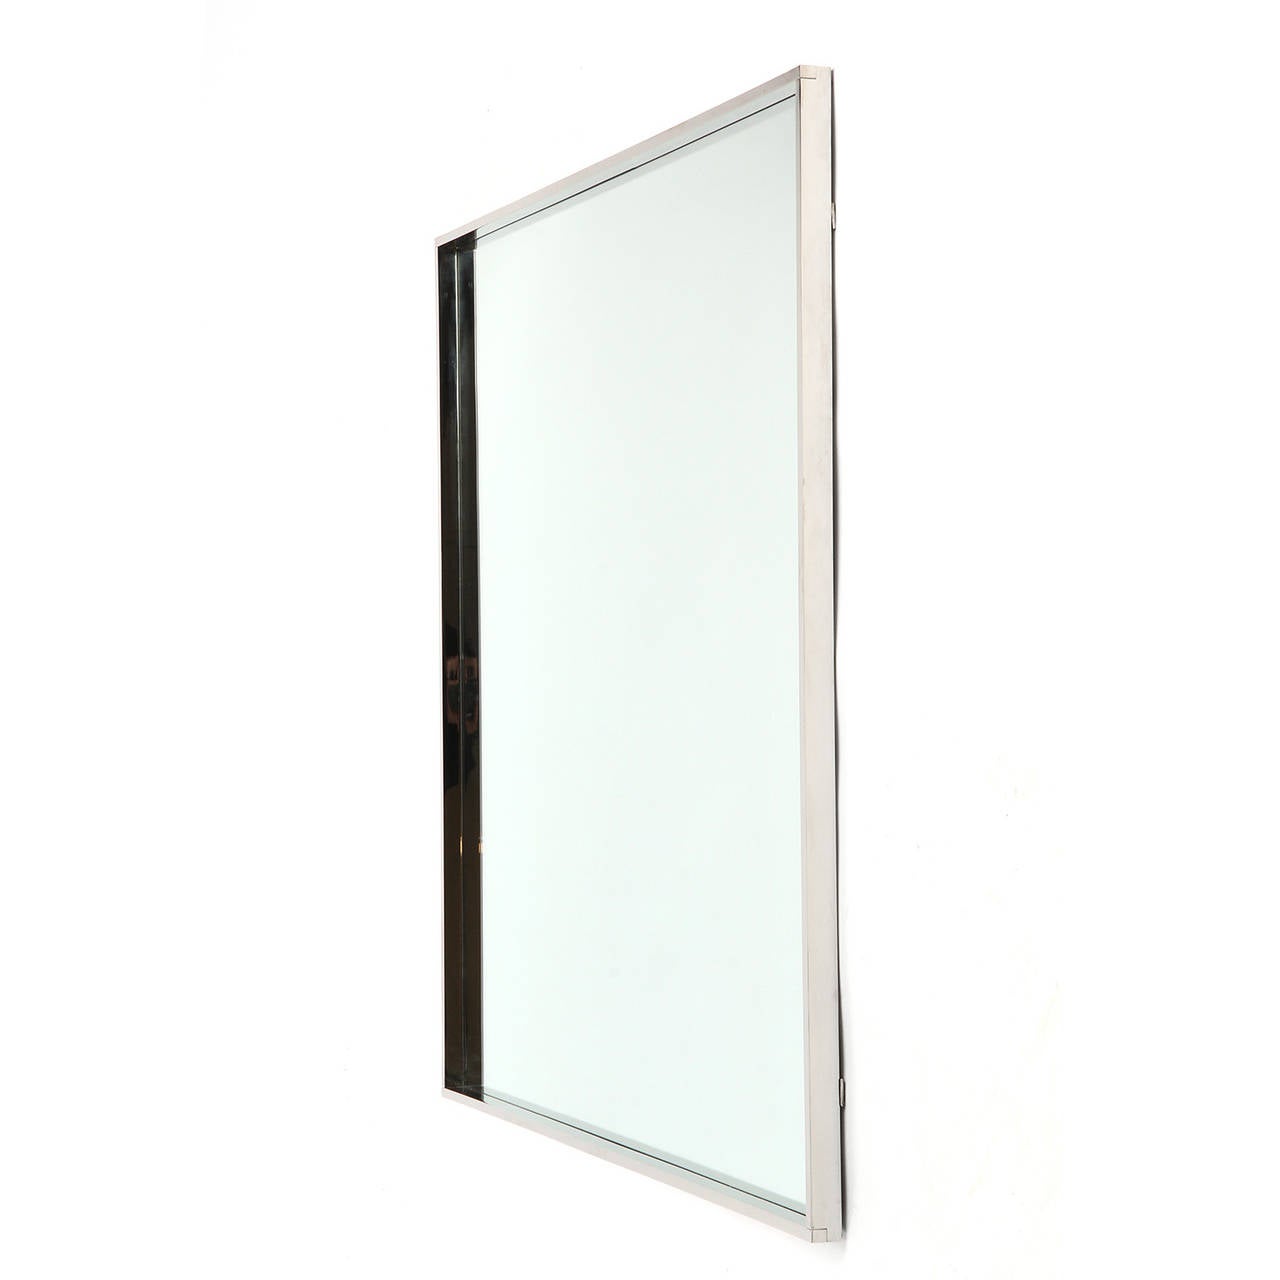 A refined and minimalist custom wall mirror of impeccable quality, featuring a handmade lap-joined frame made of heavy gauge nickel plated bronze. Designed and manufactured in New York by Wyeth, 2013.